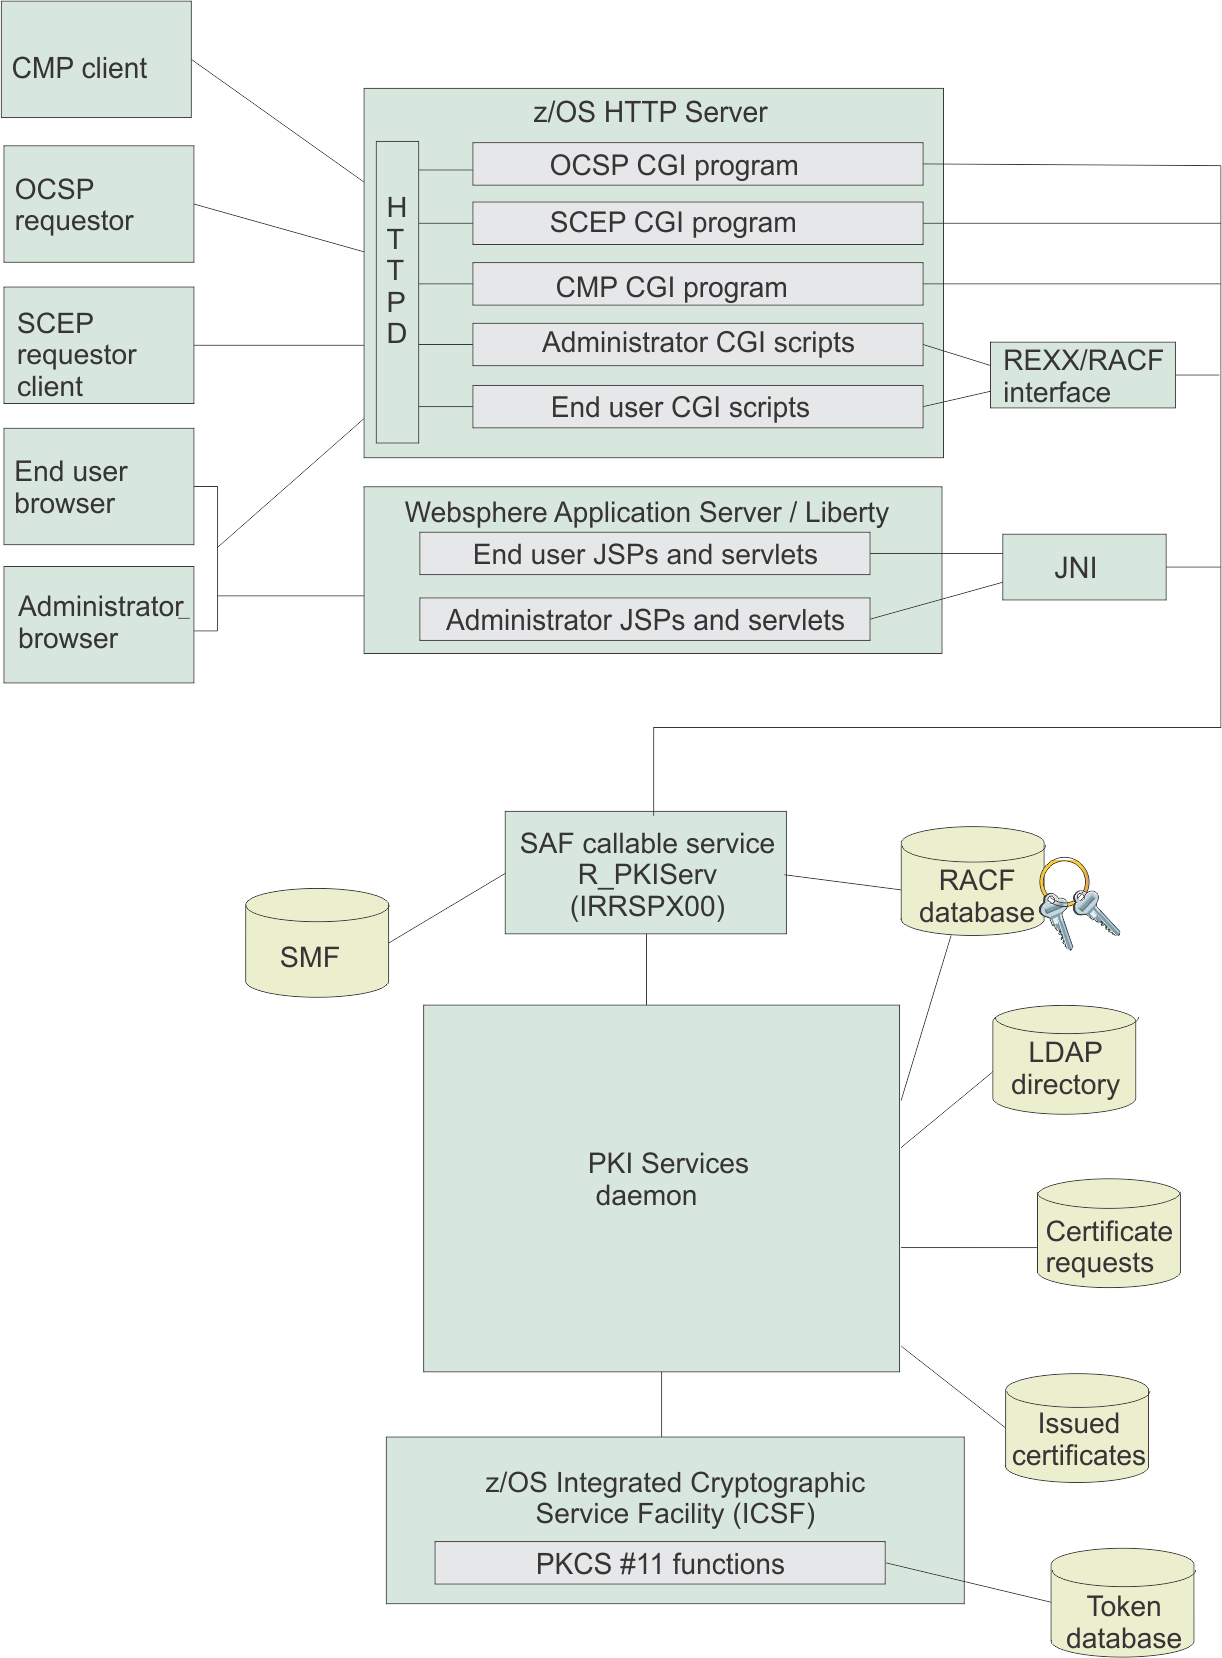 Component diagram of a typical PKI Services system